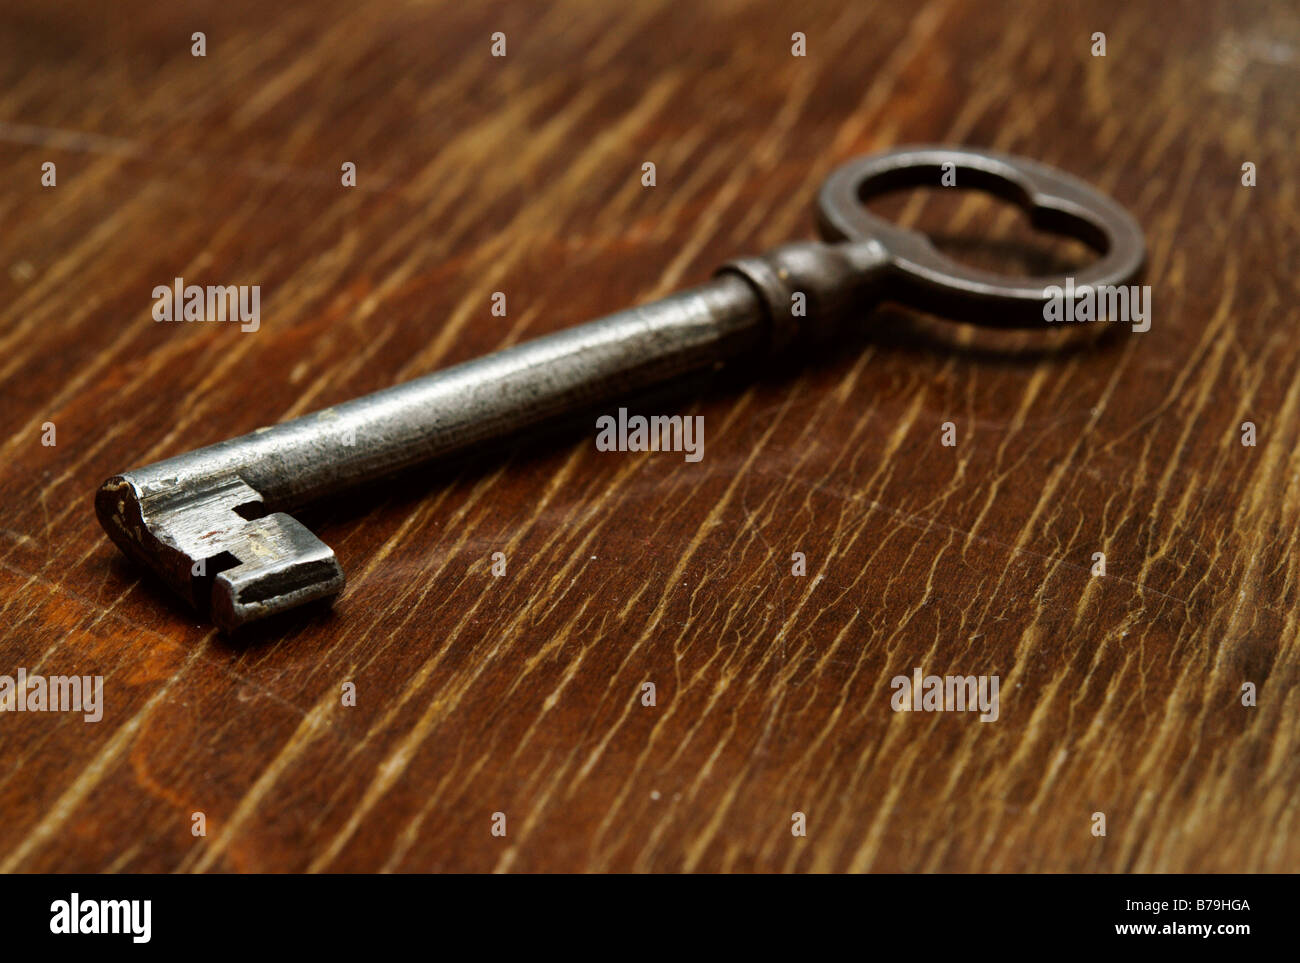 Old key on wooden tabletop Stock Photo